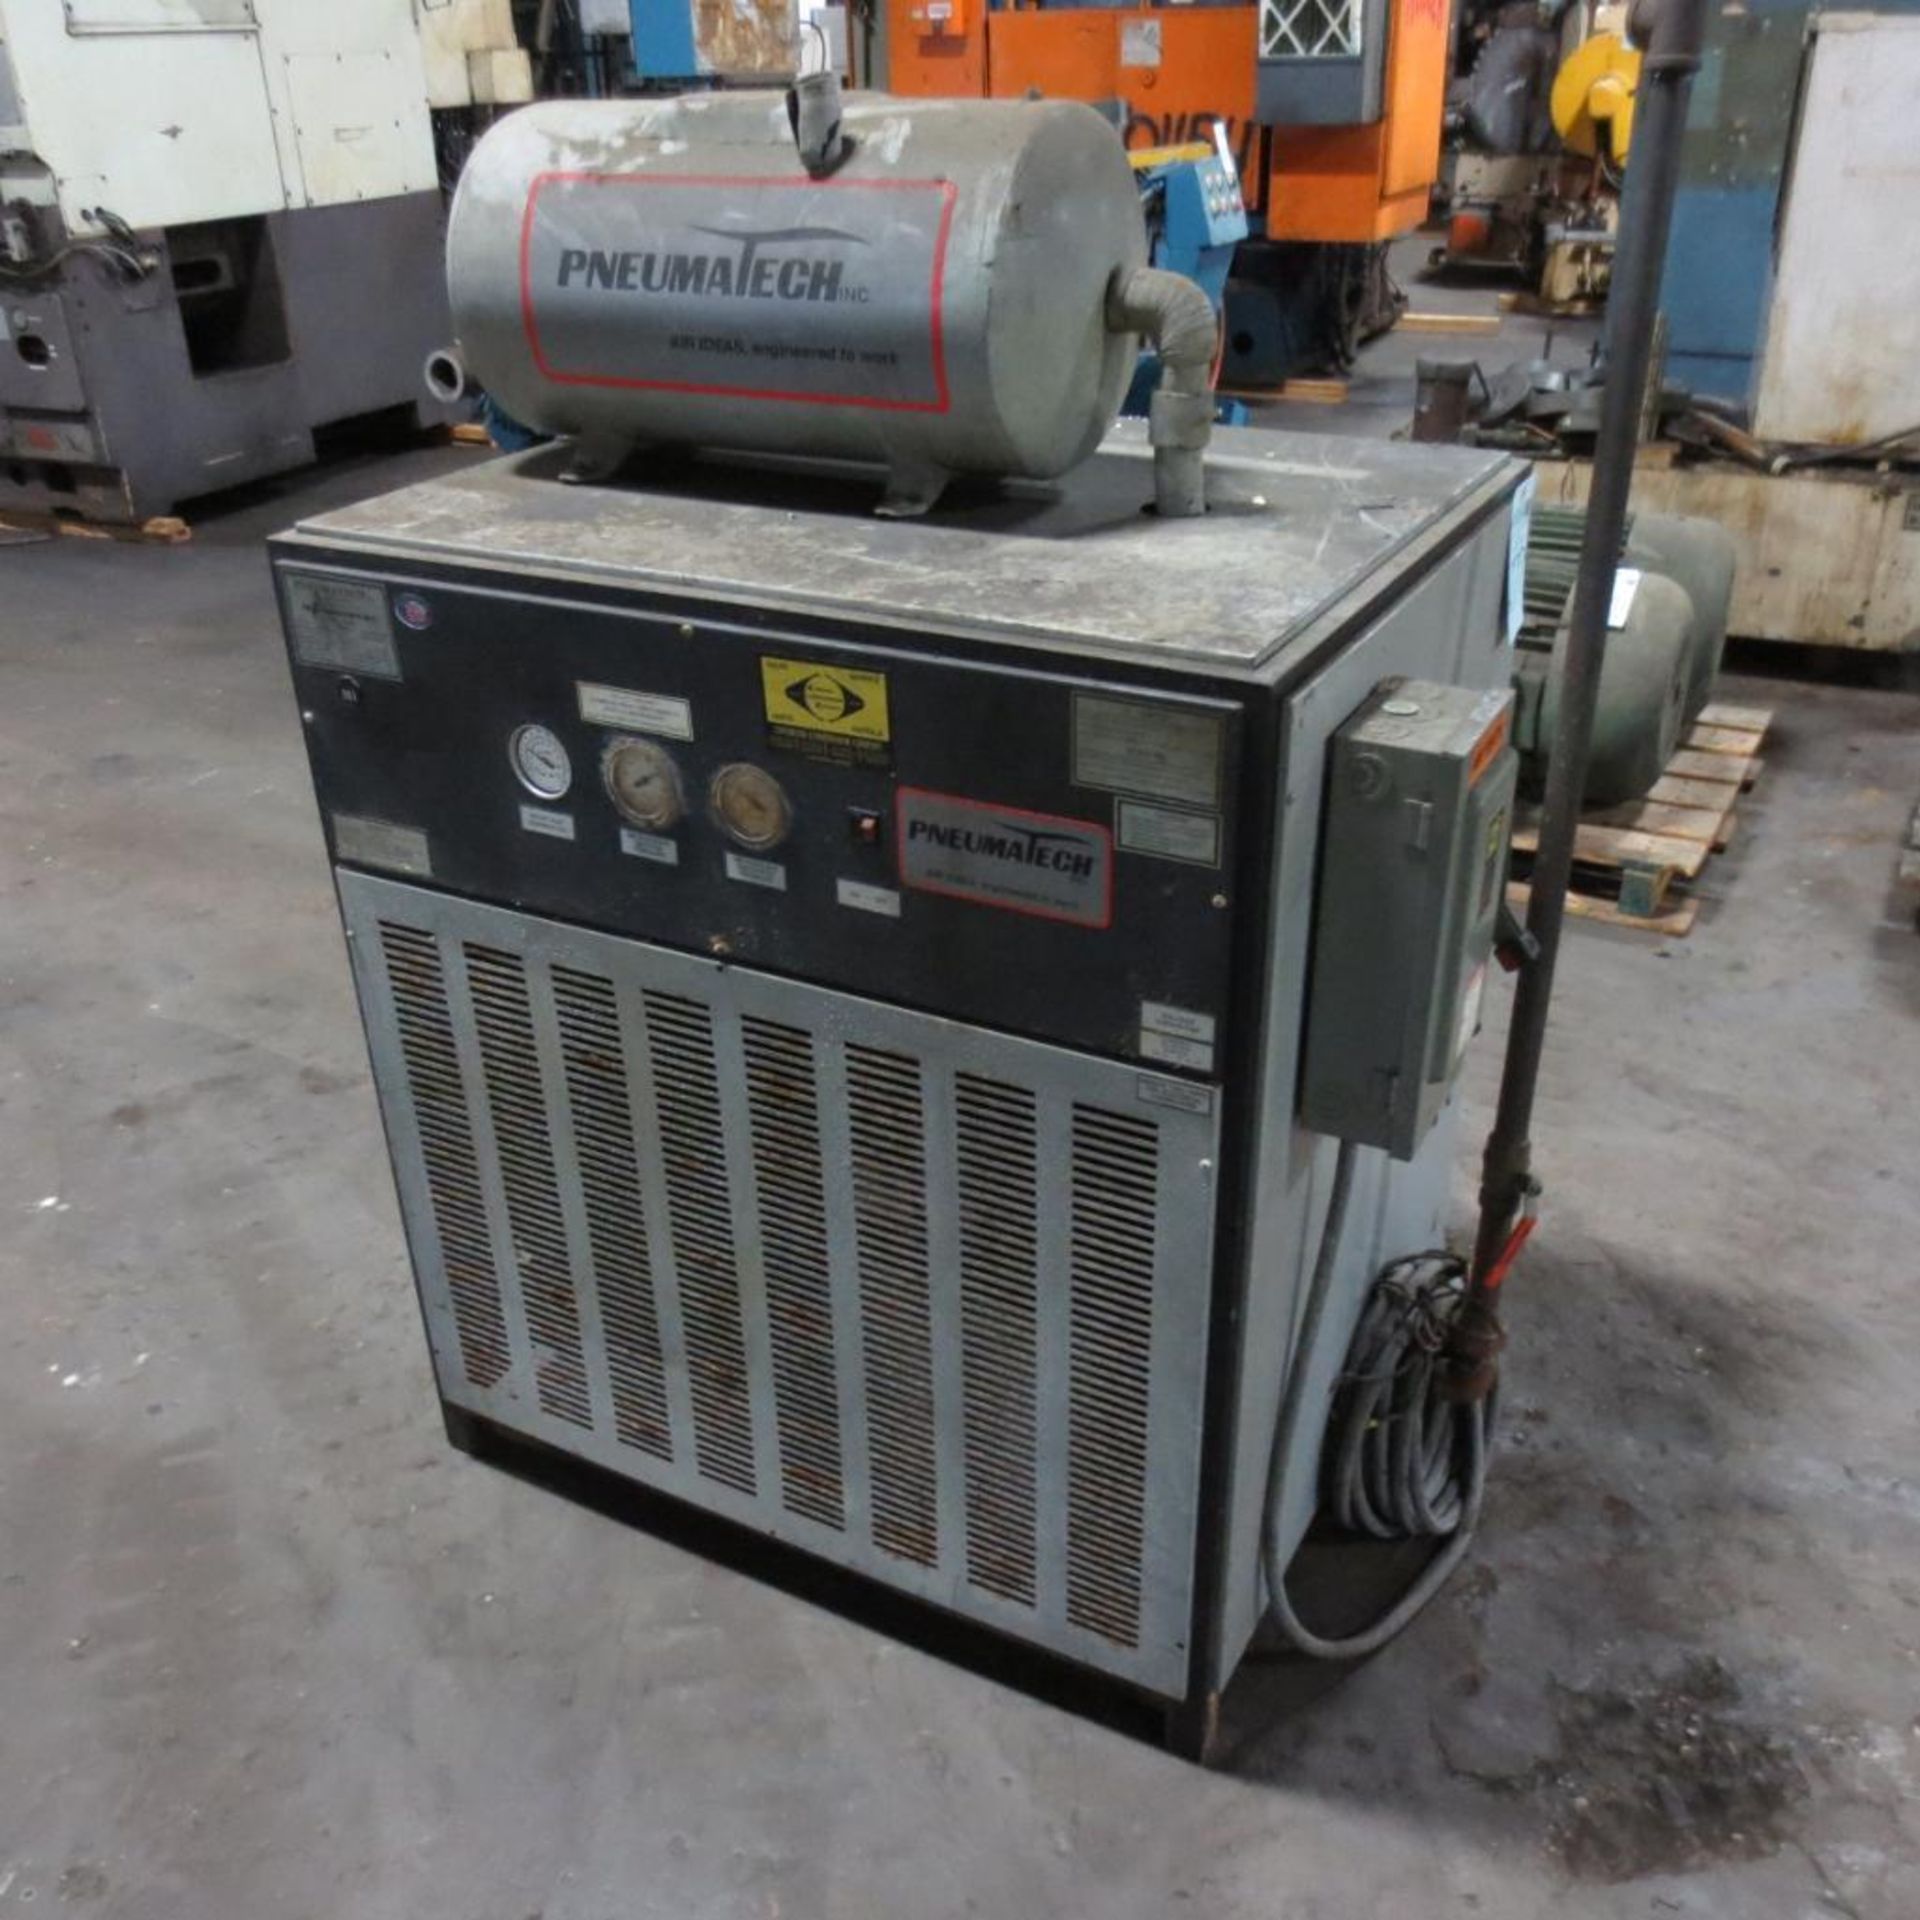 Pneumatech PAC-300 Chiller, 3 NT Cap.. Loading Fee is $25.00 - Image 2 of 3